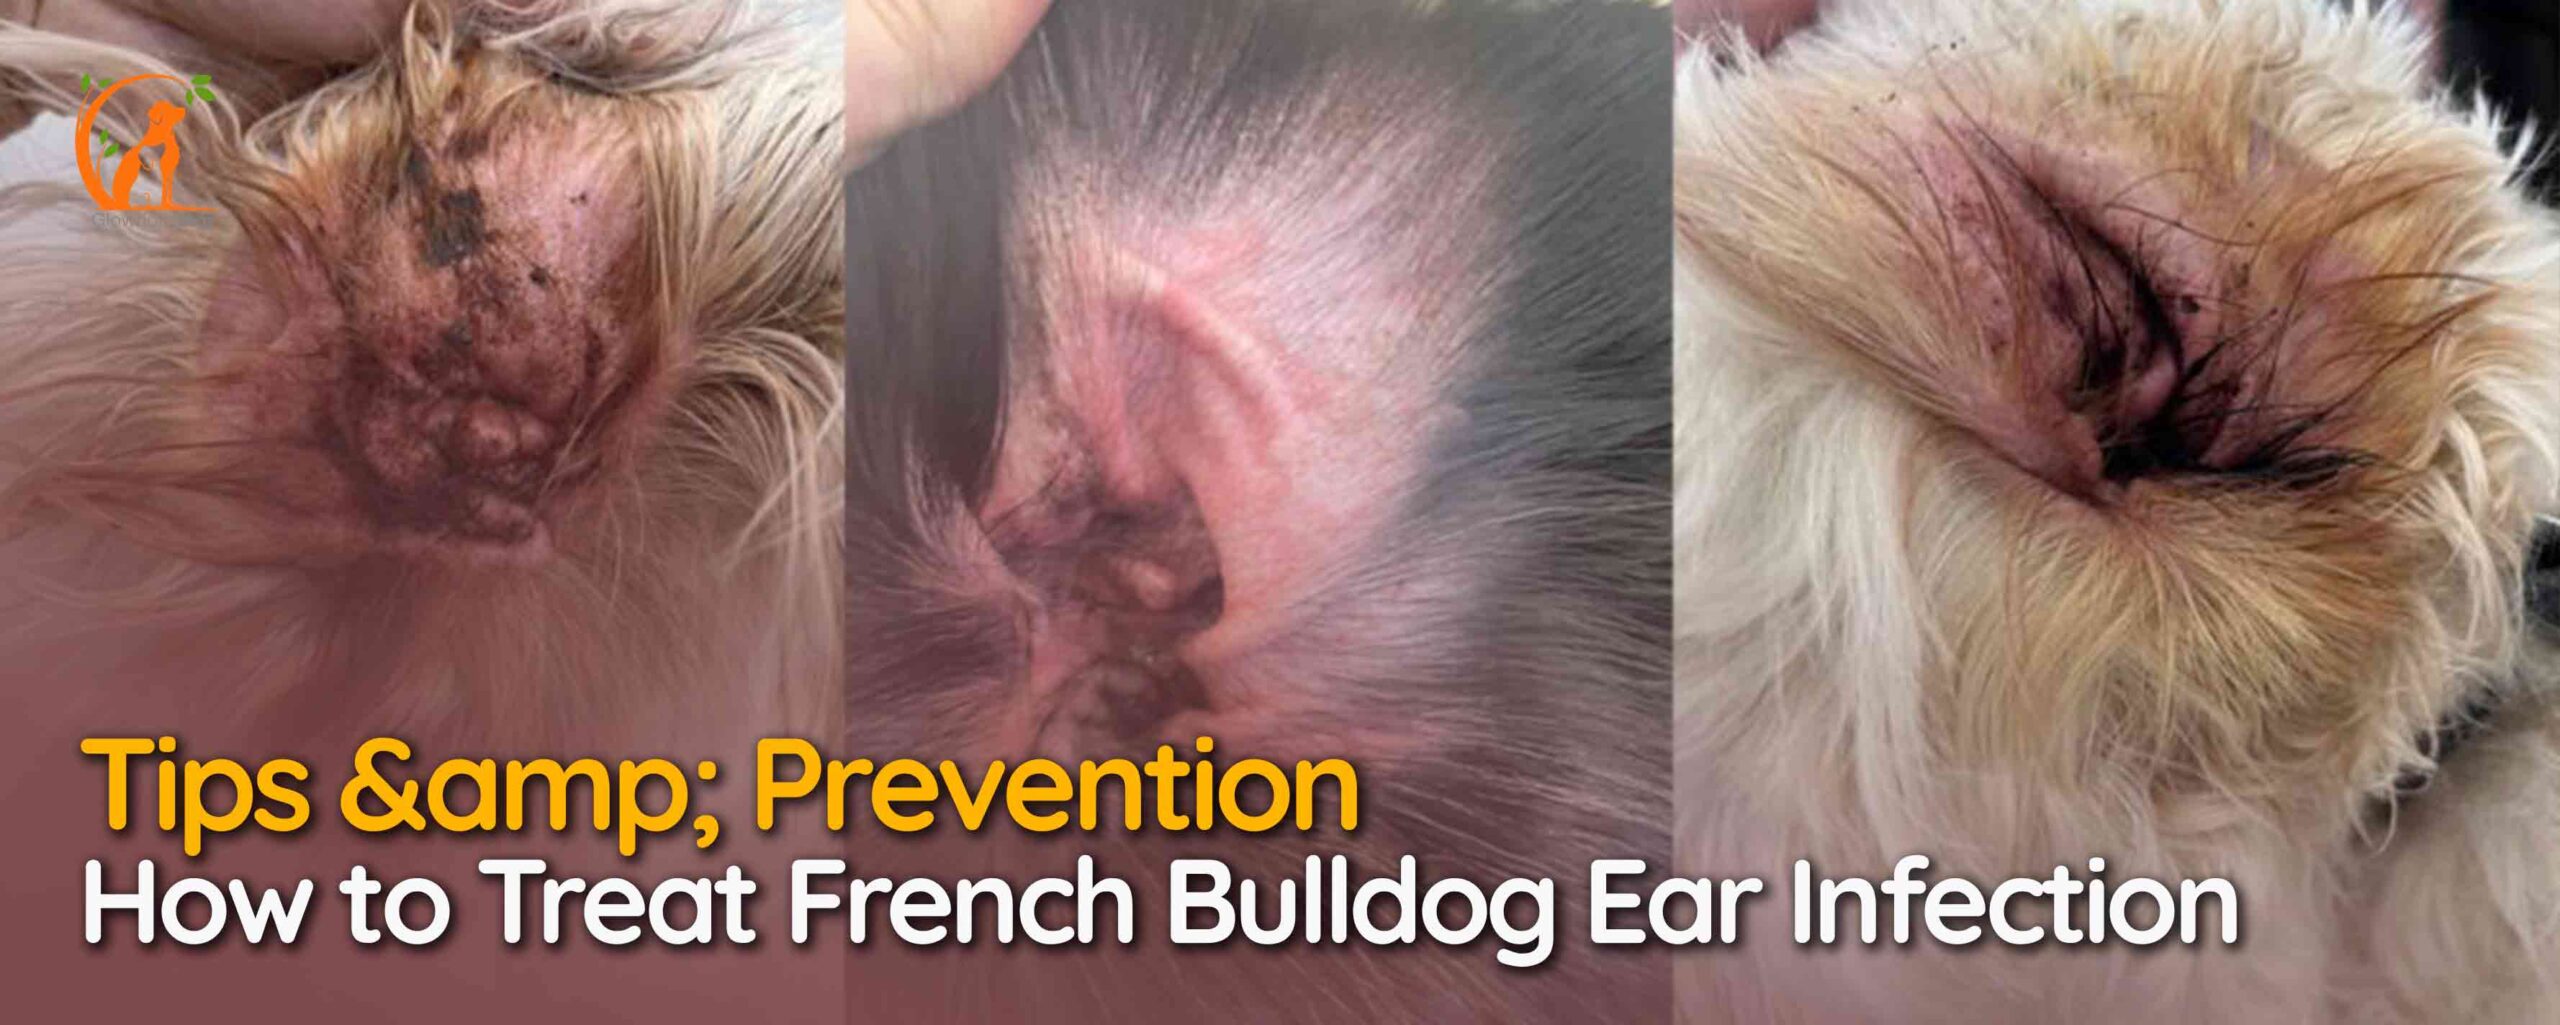 How to Treat French Bulldog Ear Infection